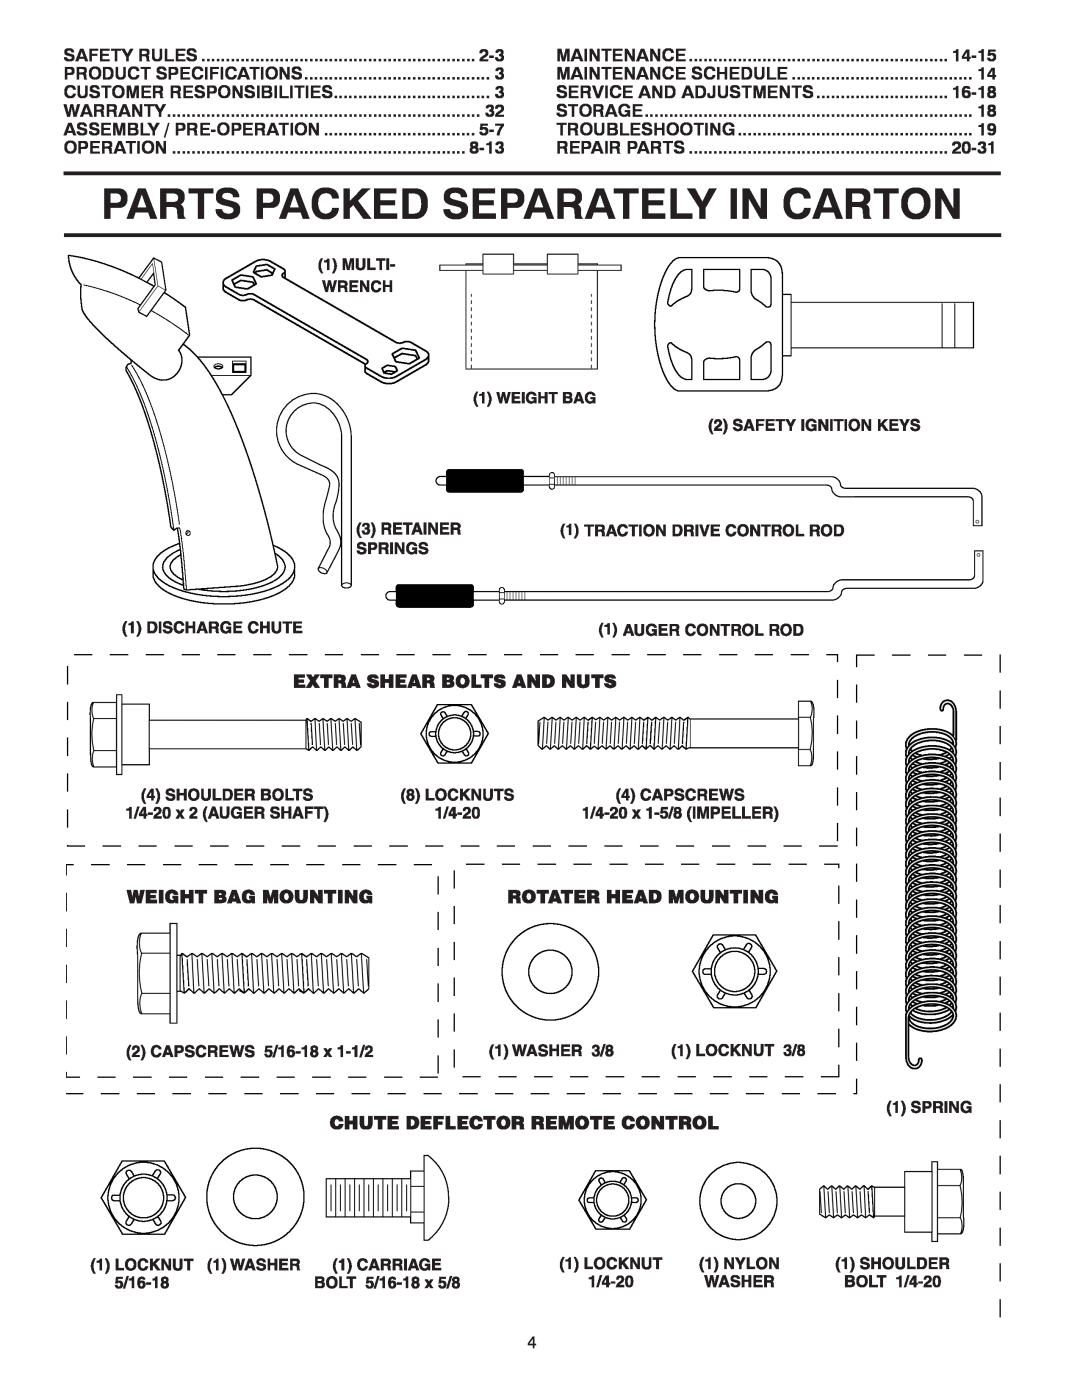 Poulan 185143 Parts Packed Separately In Carton, 8-13, 14-15, Service And Adjustments, 16-18, 20-31, Safety Rules, Storage 